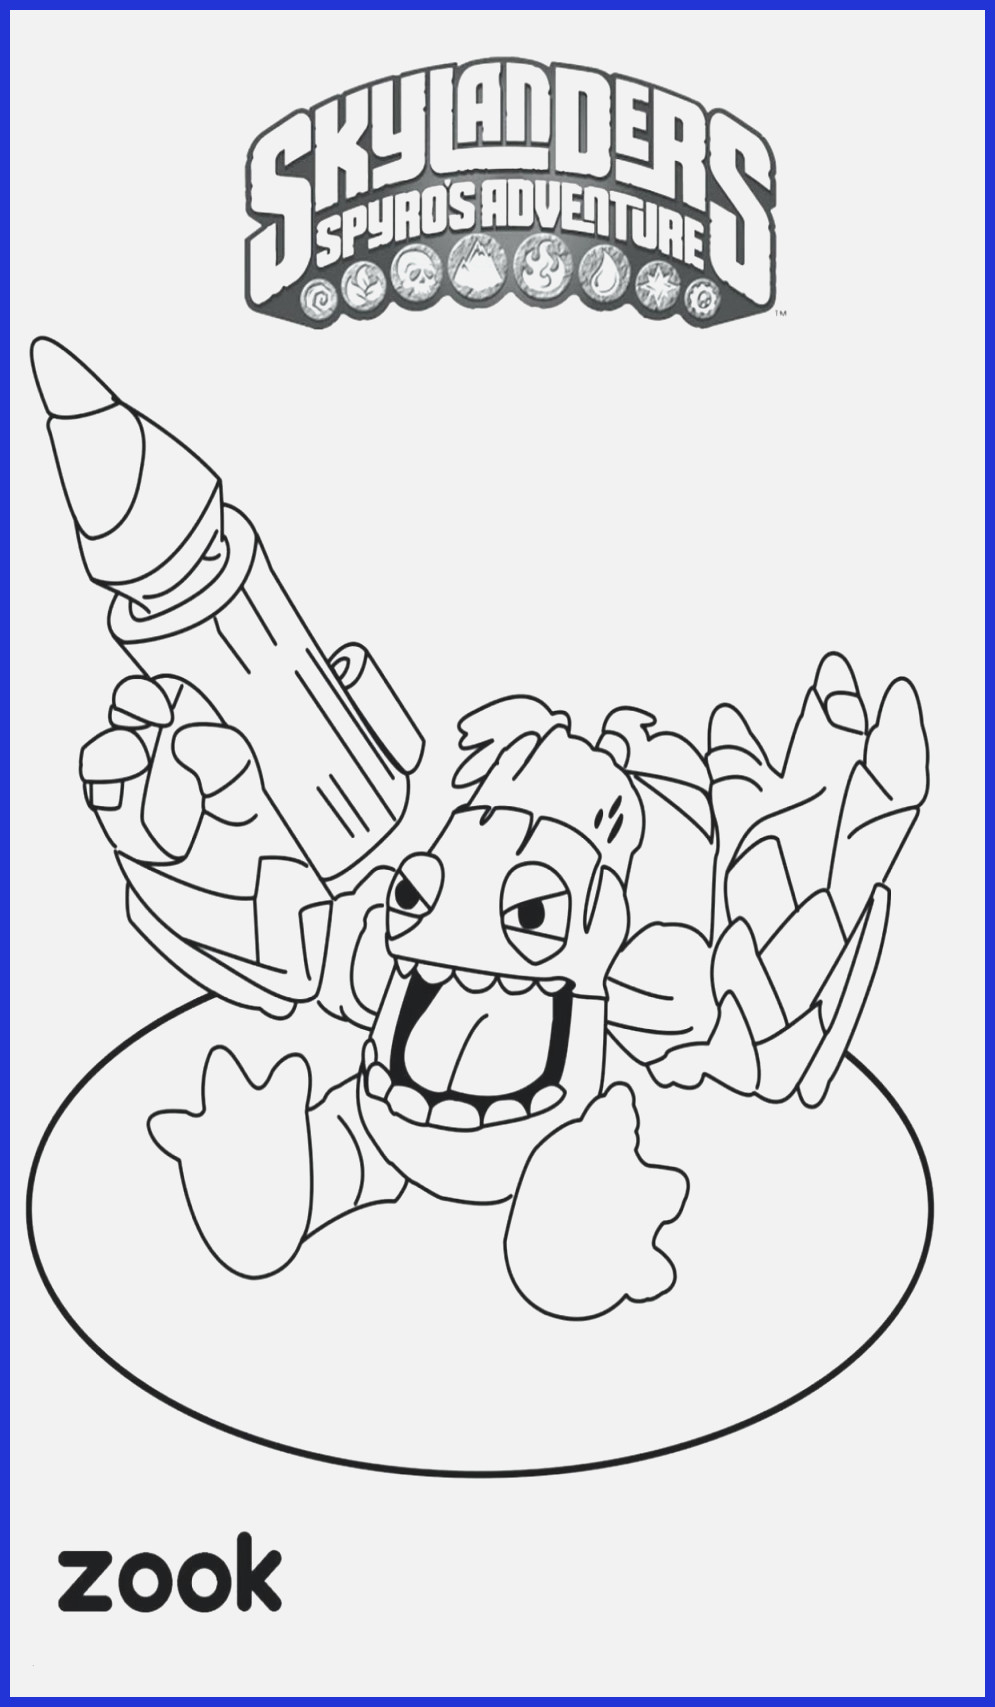 Santa Claus In Sleigh Coloring Page Santa Sleigh Coloring Pages Santa Claus His Sleigh Coloring Pages